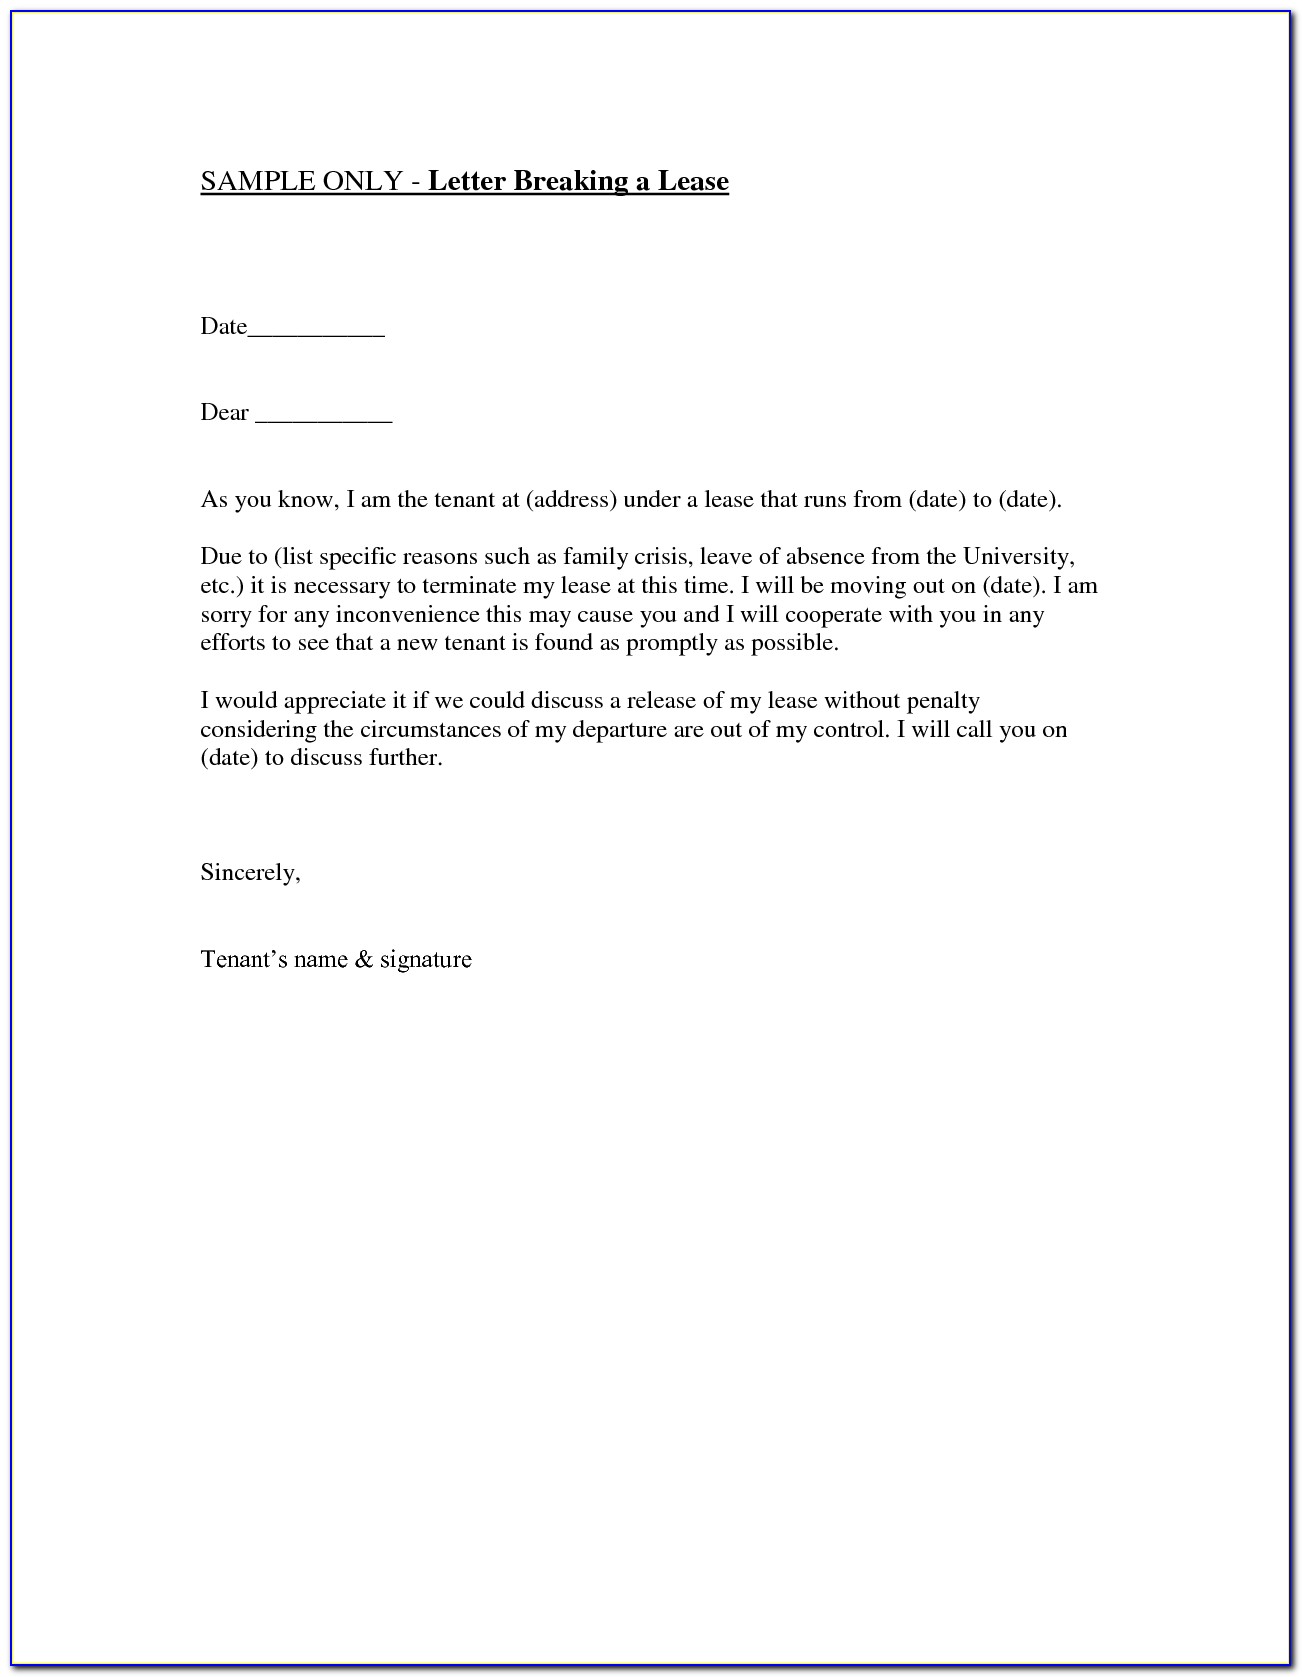 Commercial Lease Agreement Template Word Free